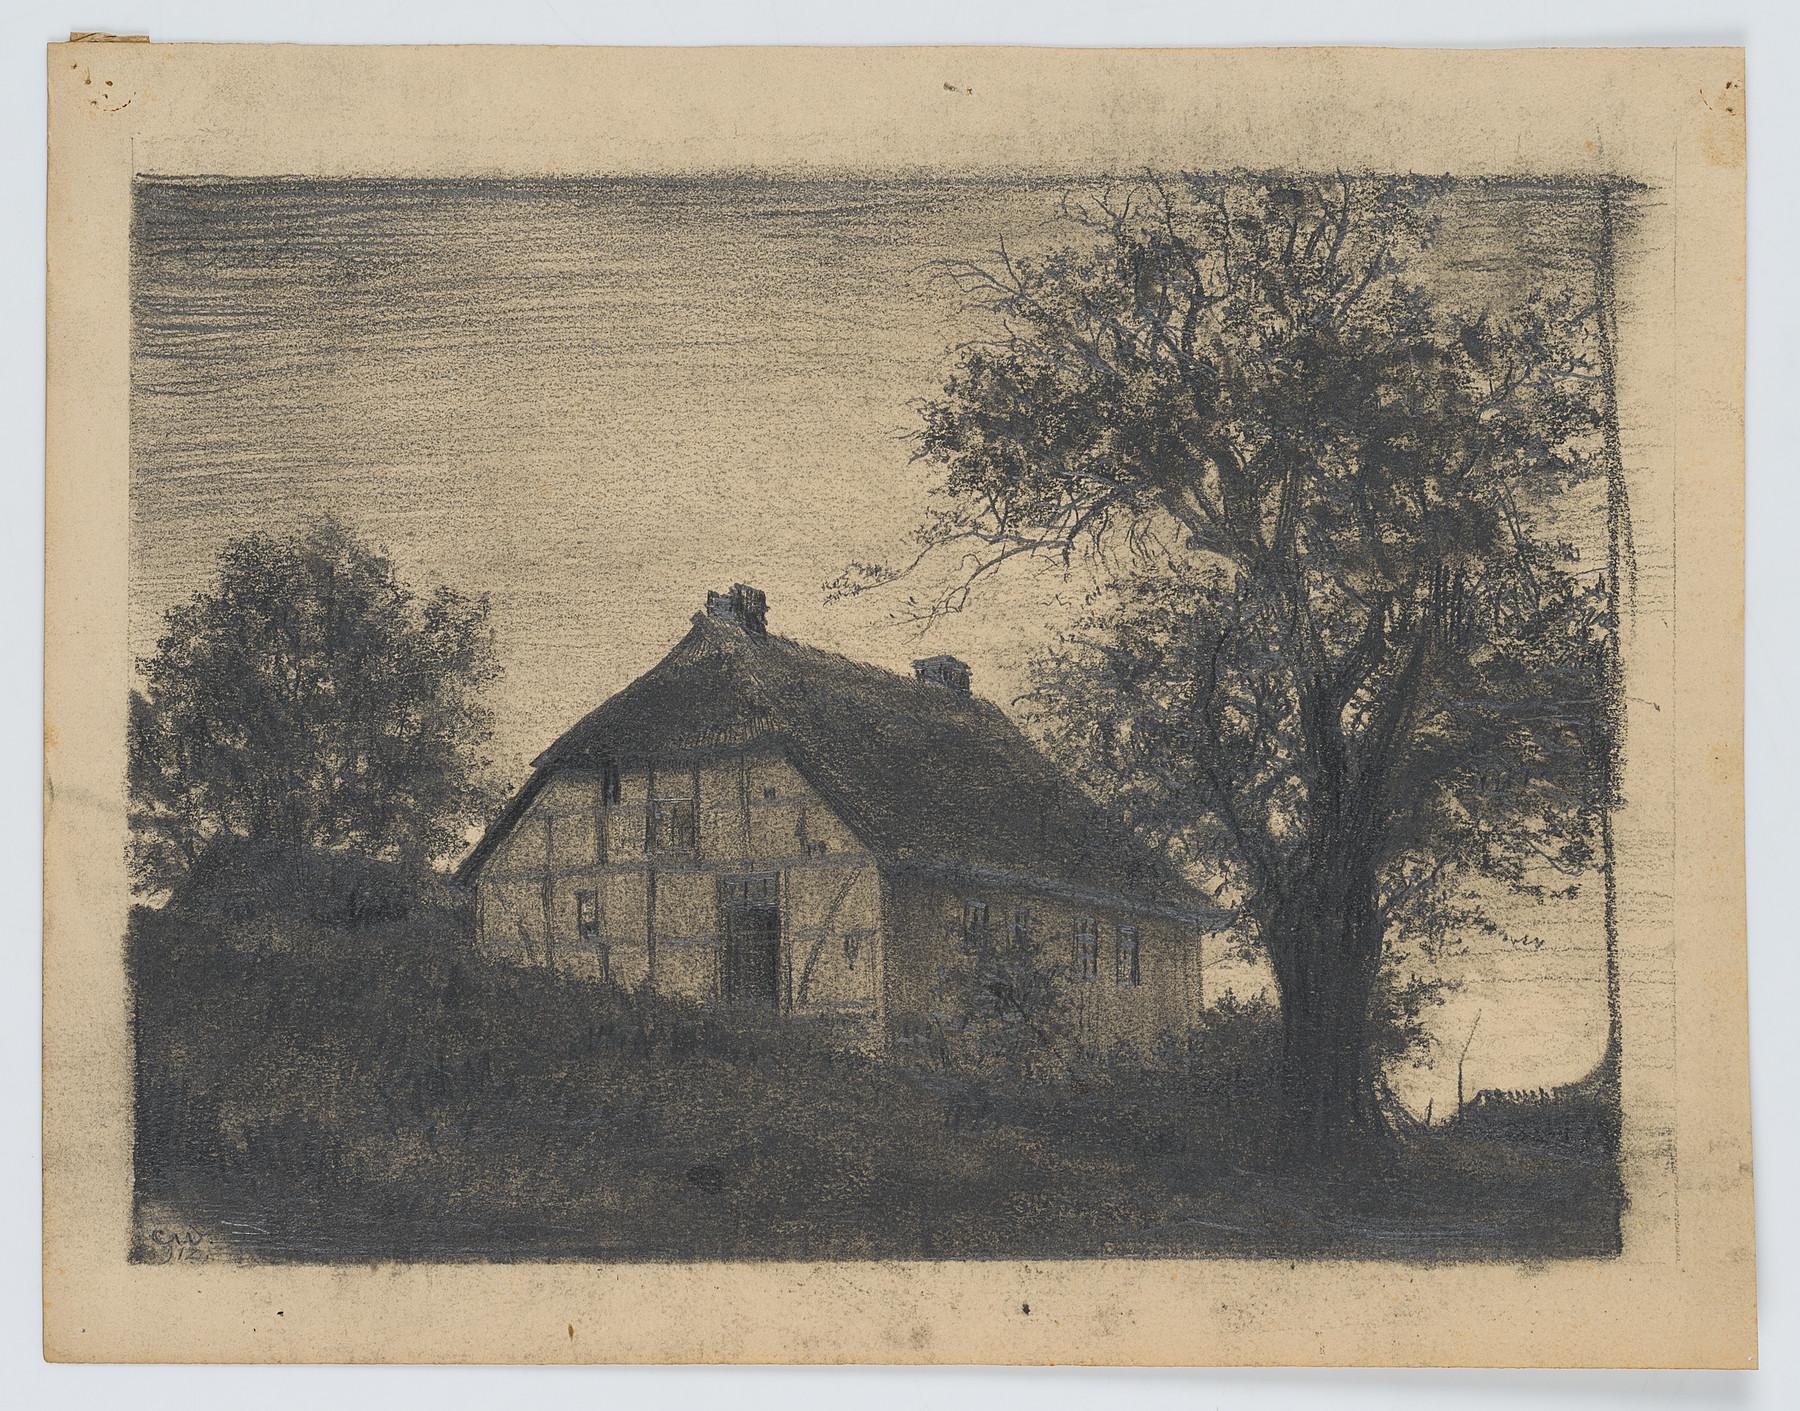 Half-timbered house and old tree - Art by Carl August Walther